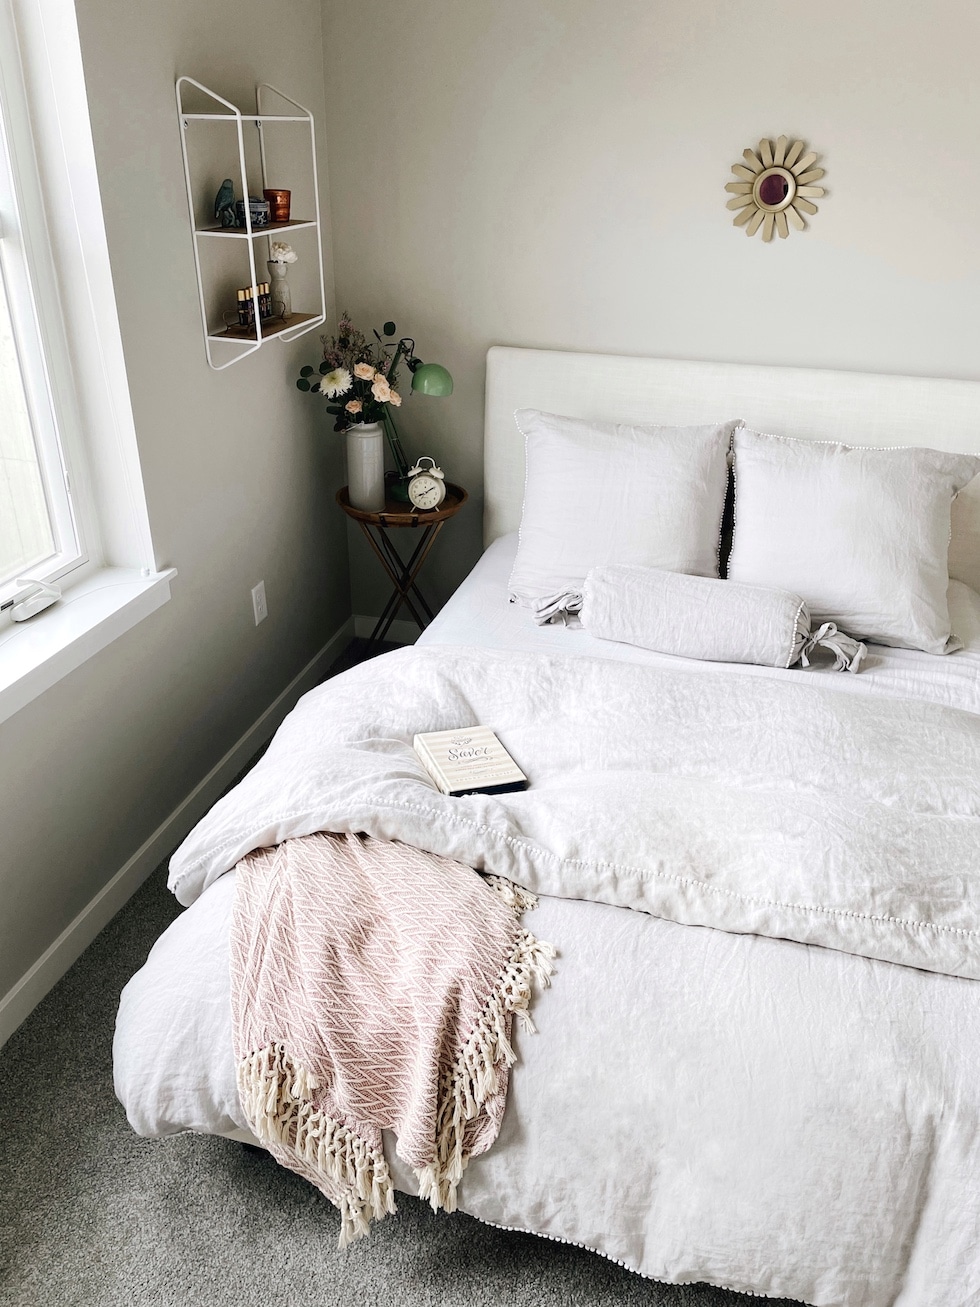 5 Clever Ways to Make a Small Space Cozy and Inviting (Courtney's Apartment)